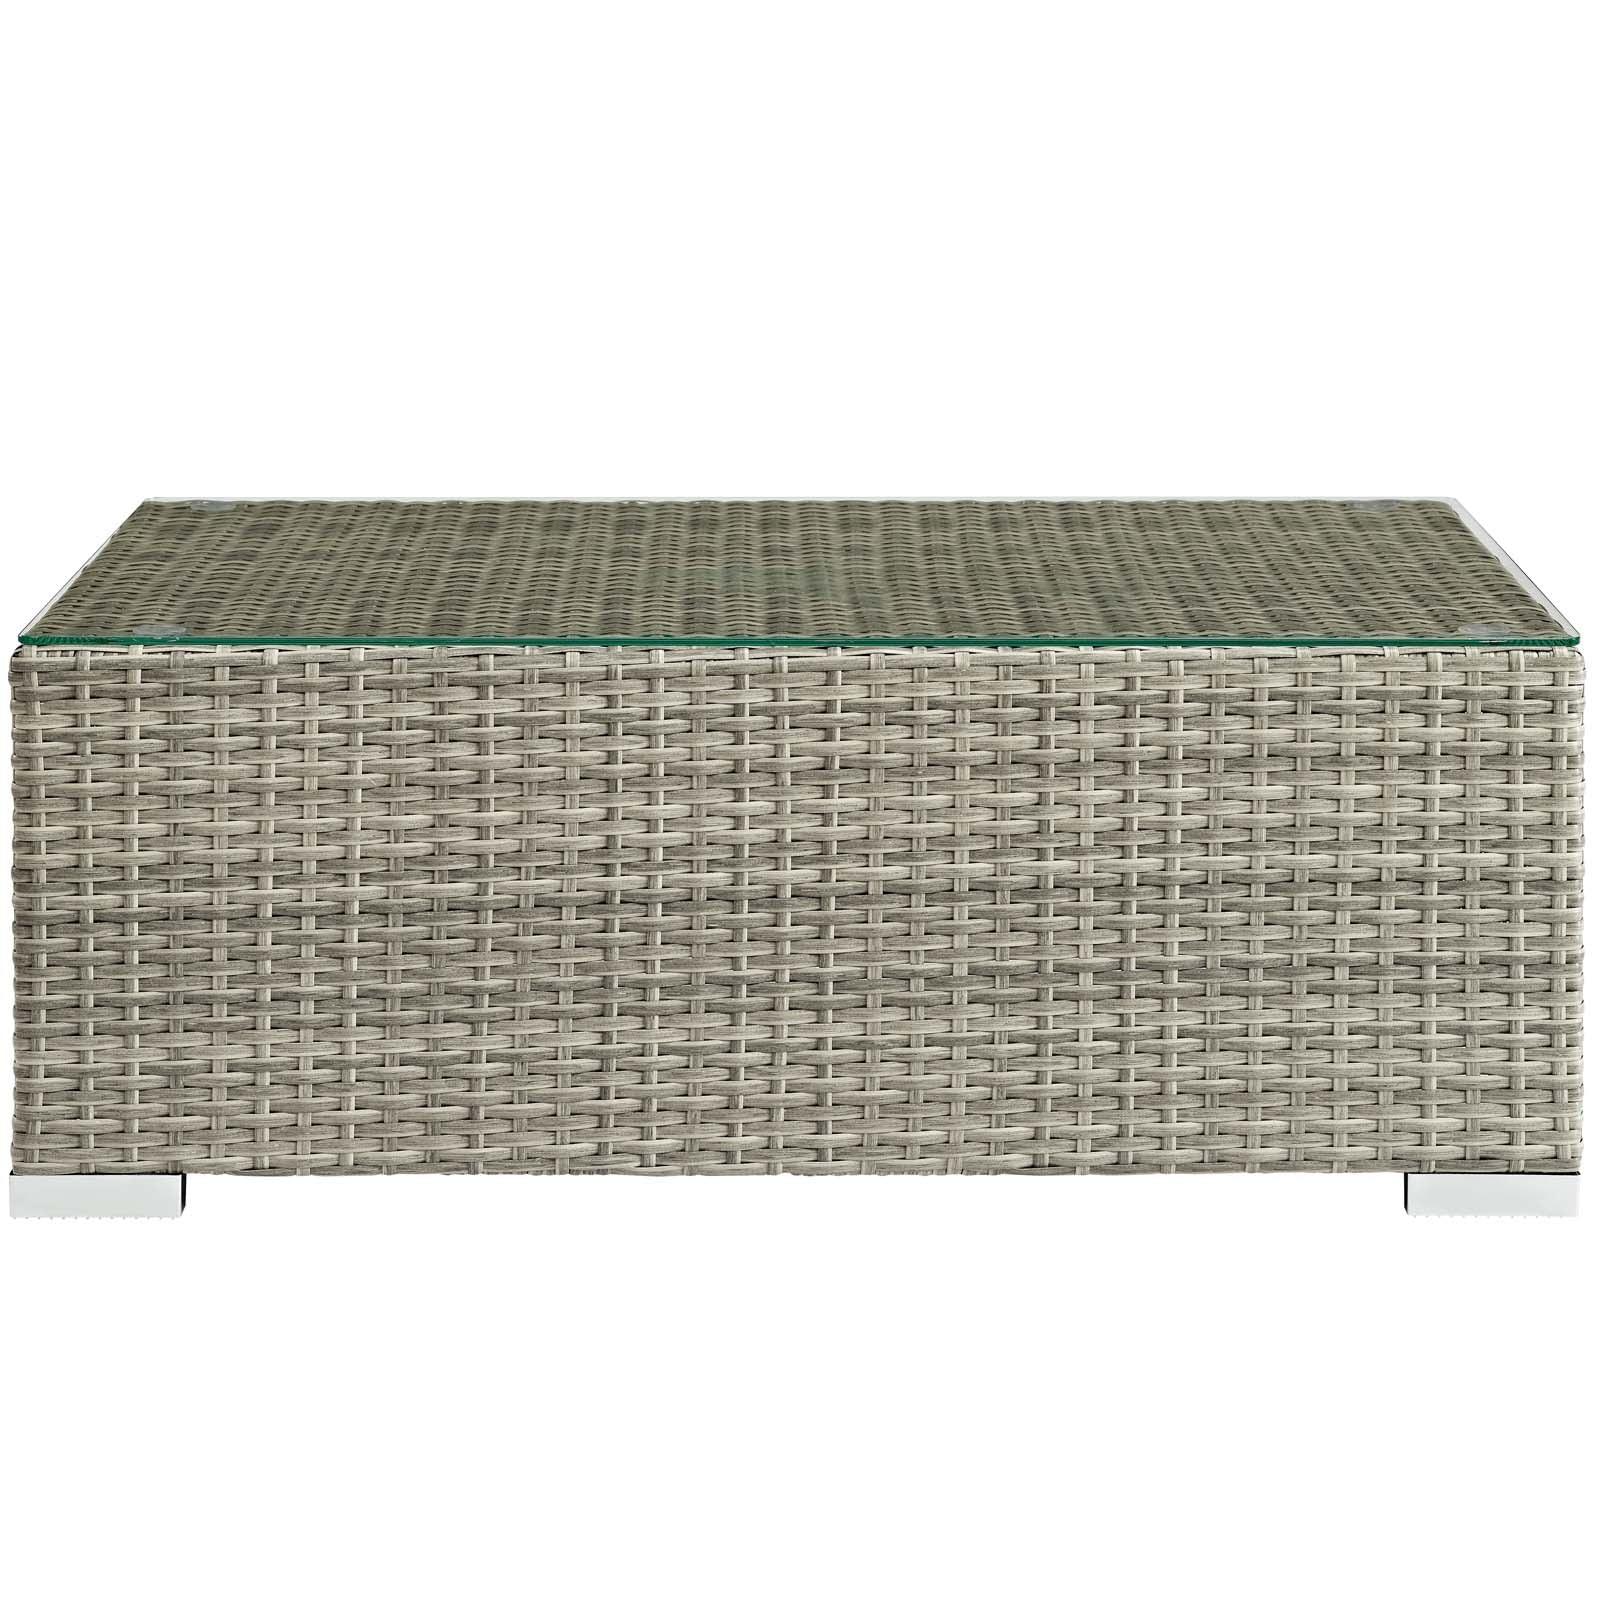 Modway Repose Outdoor Patio Coffee Table FredCo